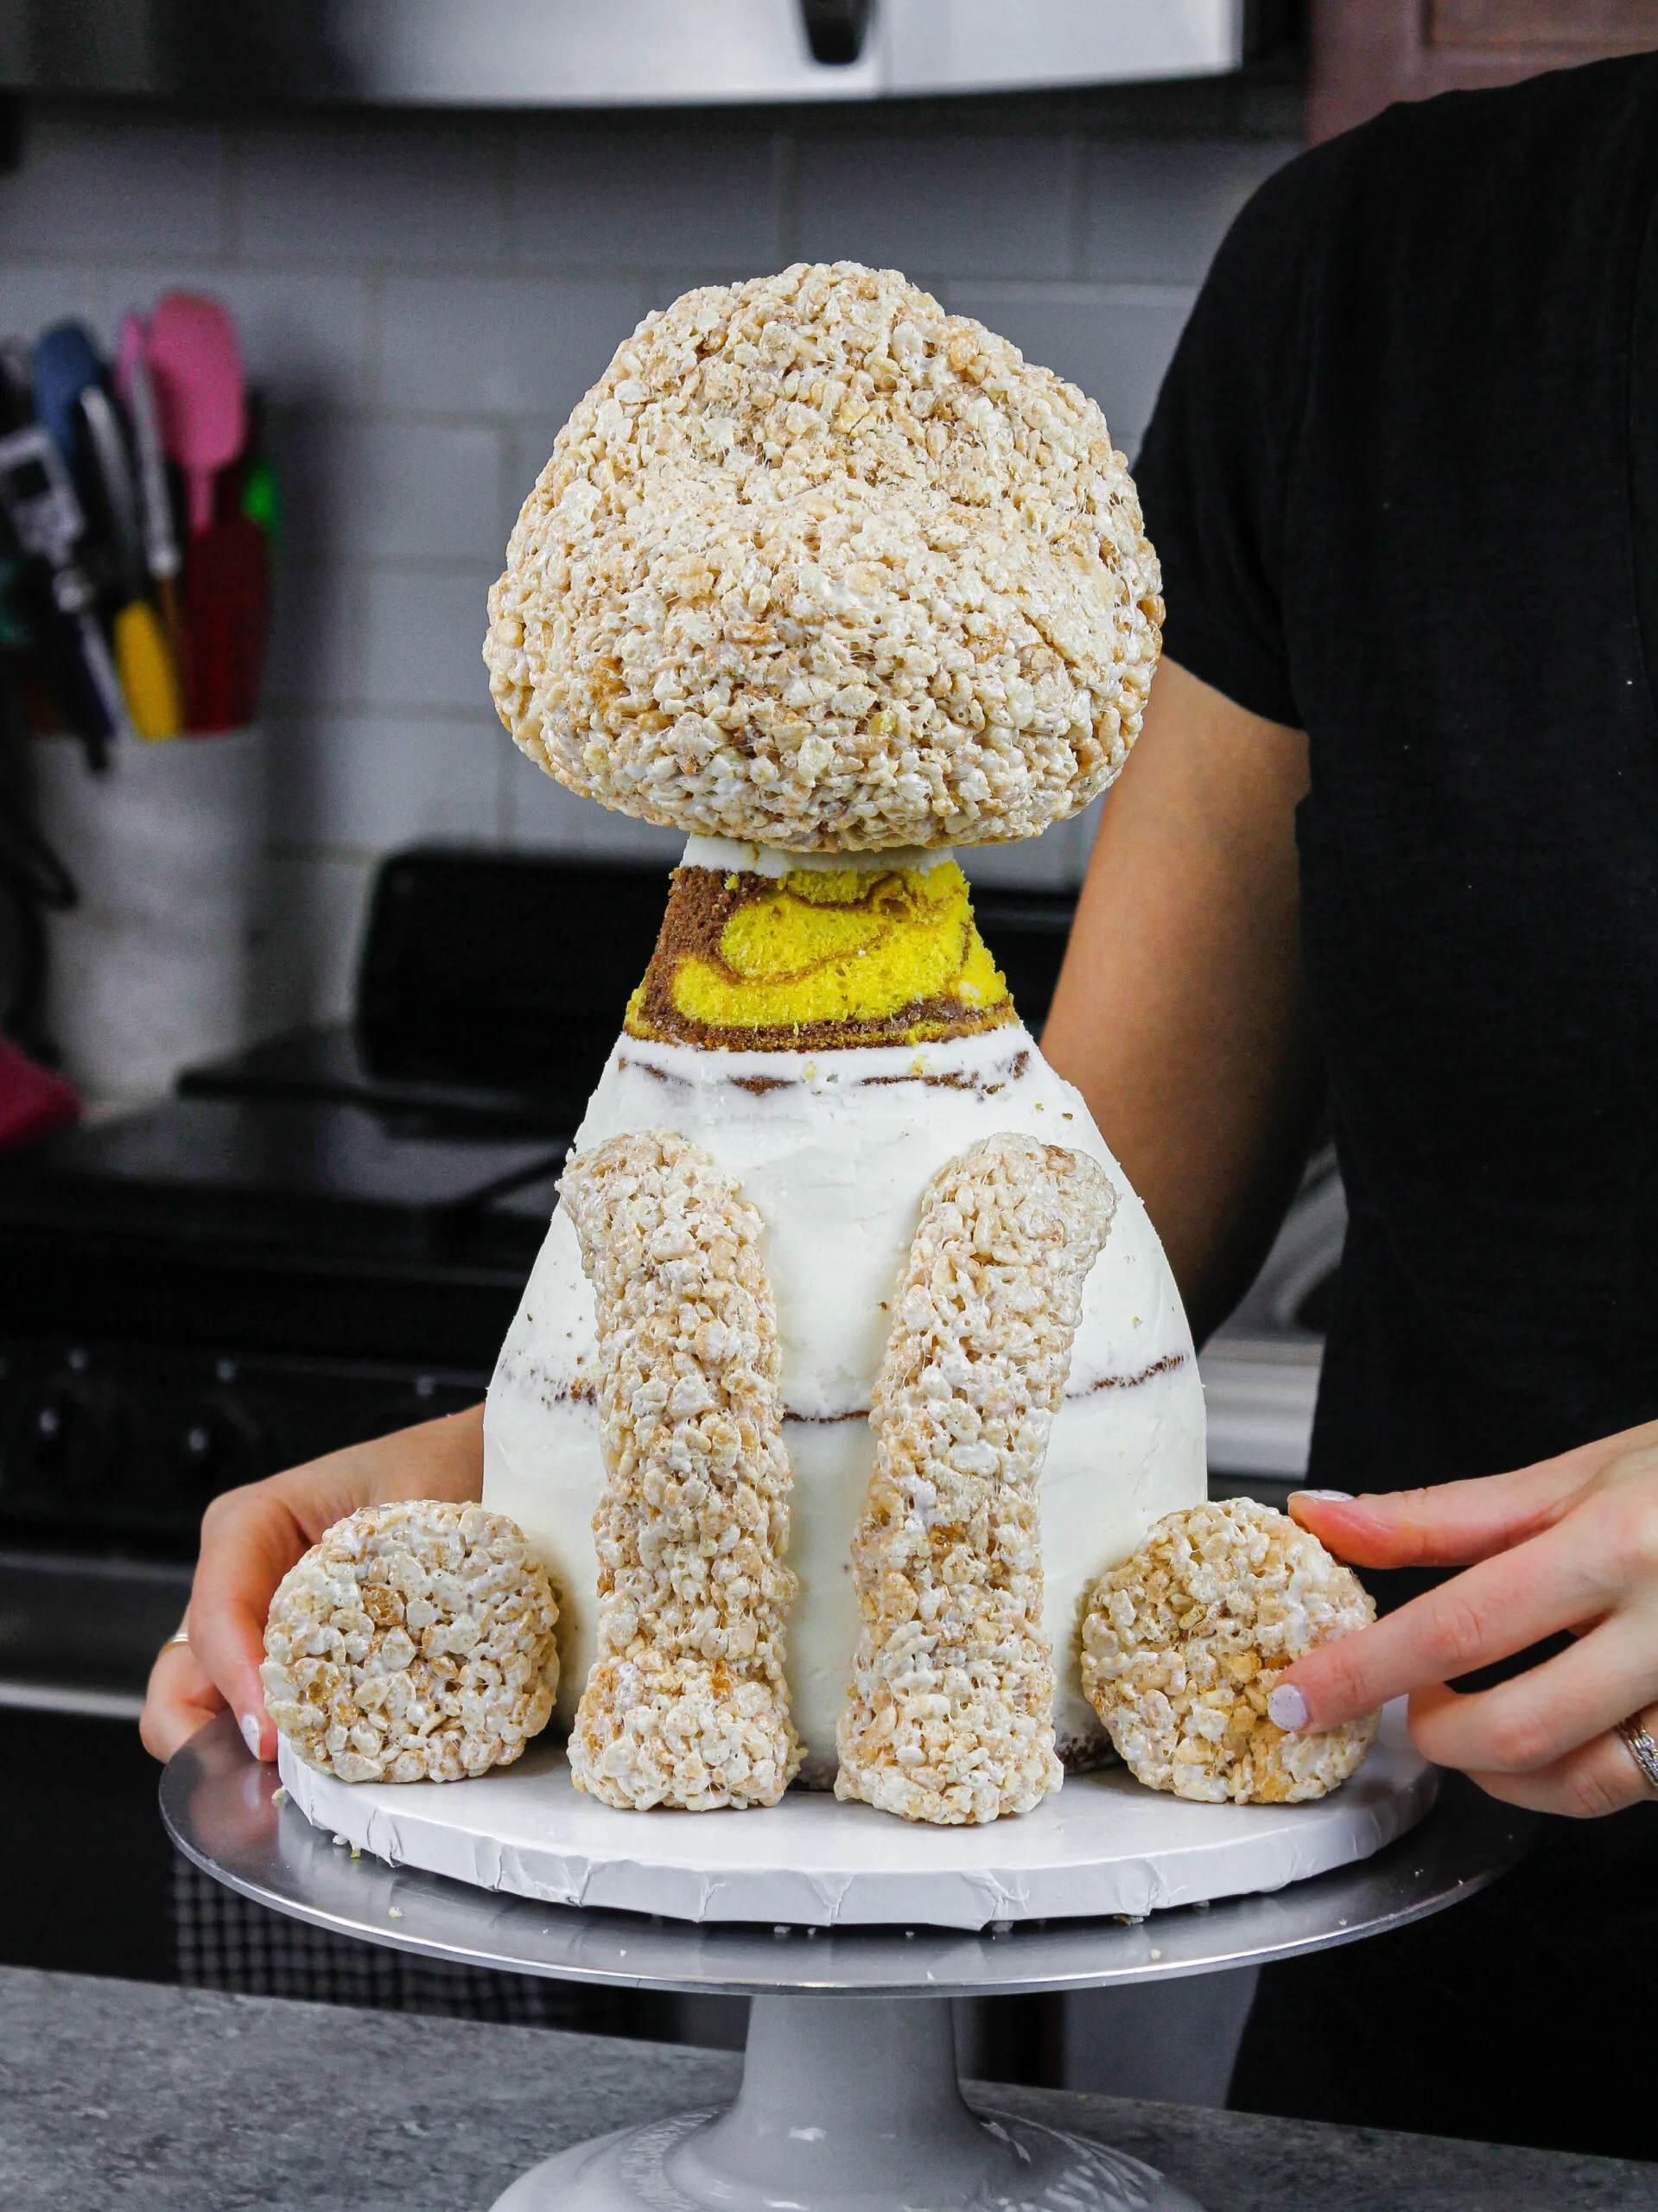 image of a giraffe cake being made with marble cake layers and cake decorating rice krispies